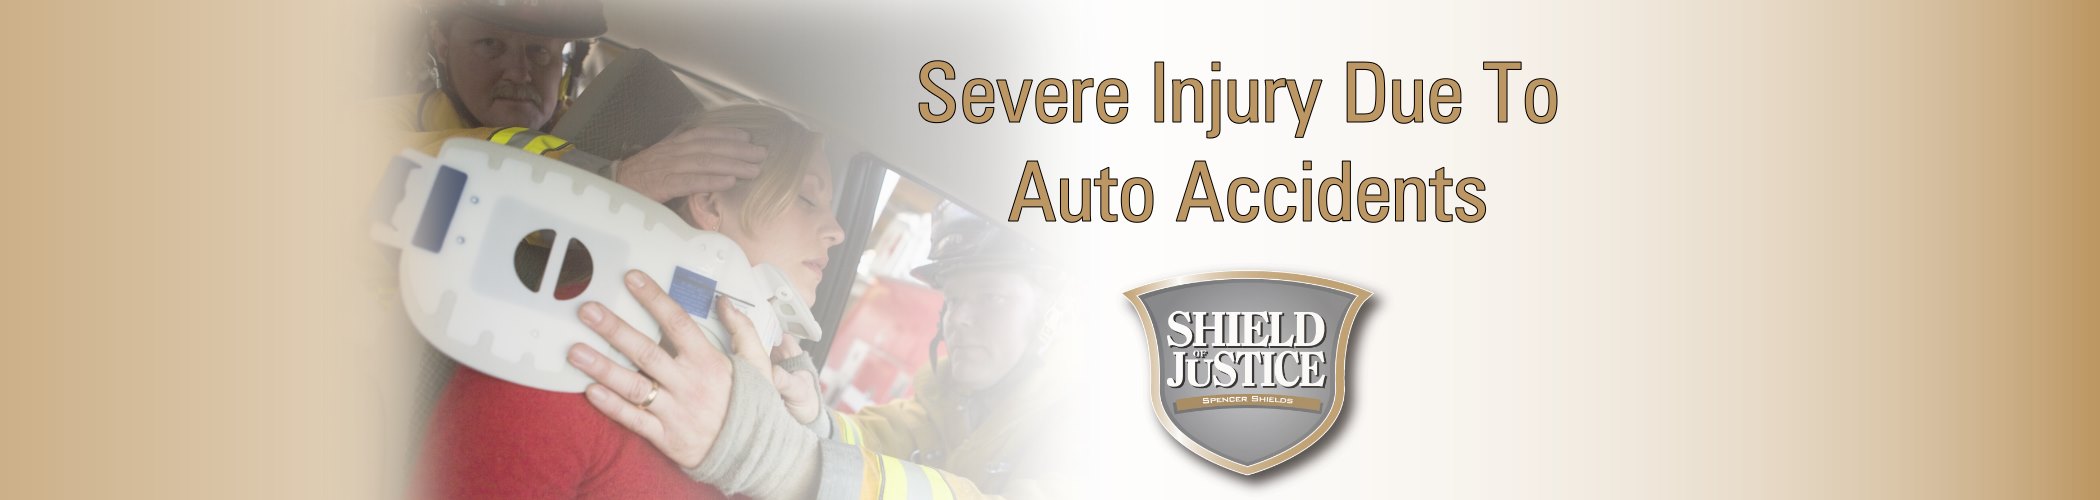 Severe Injury Due To Auto Accidents